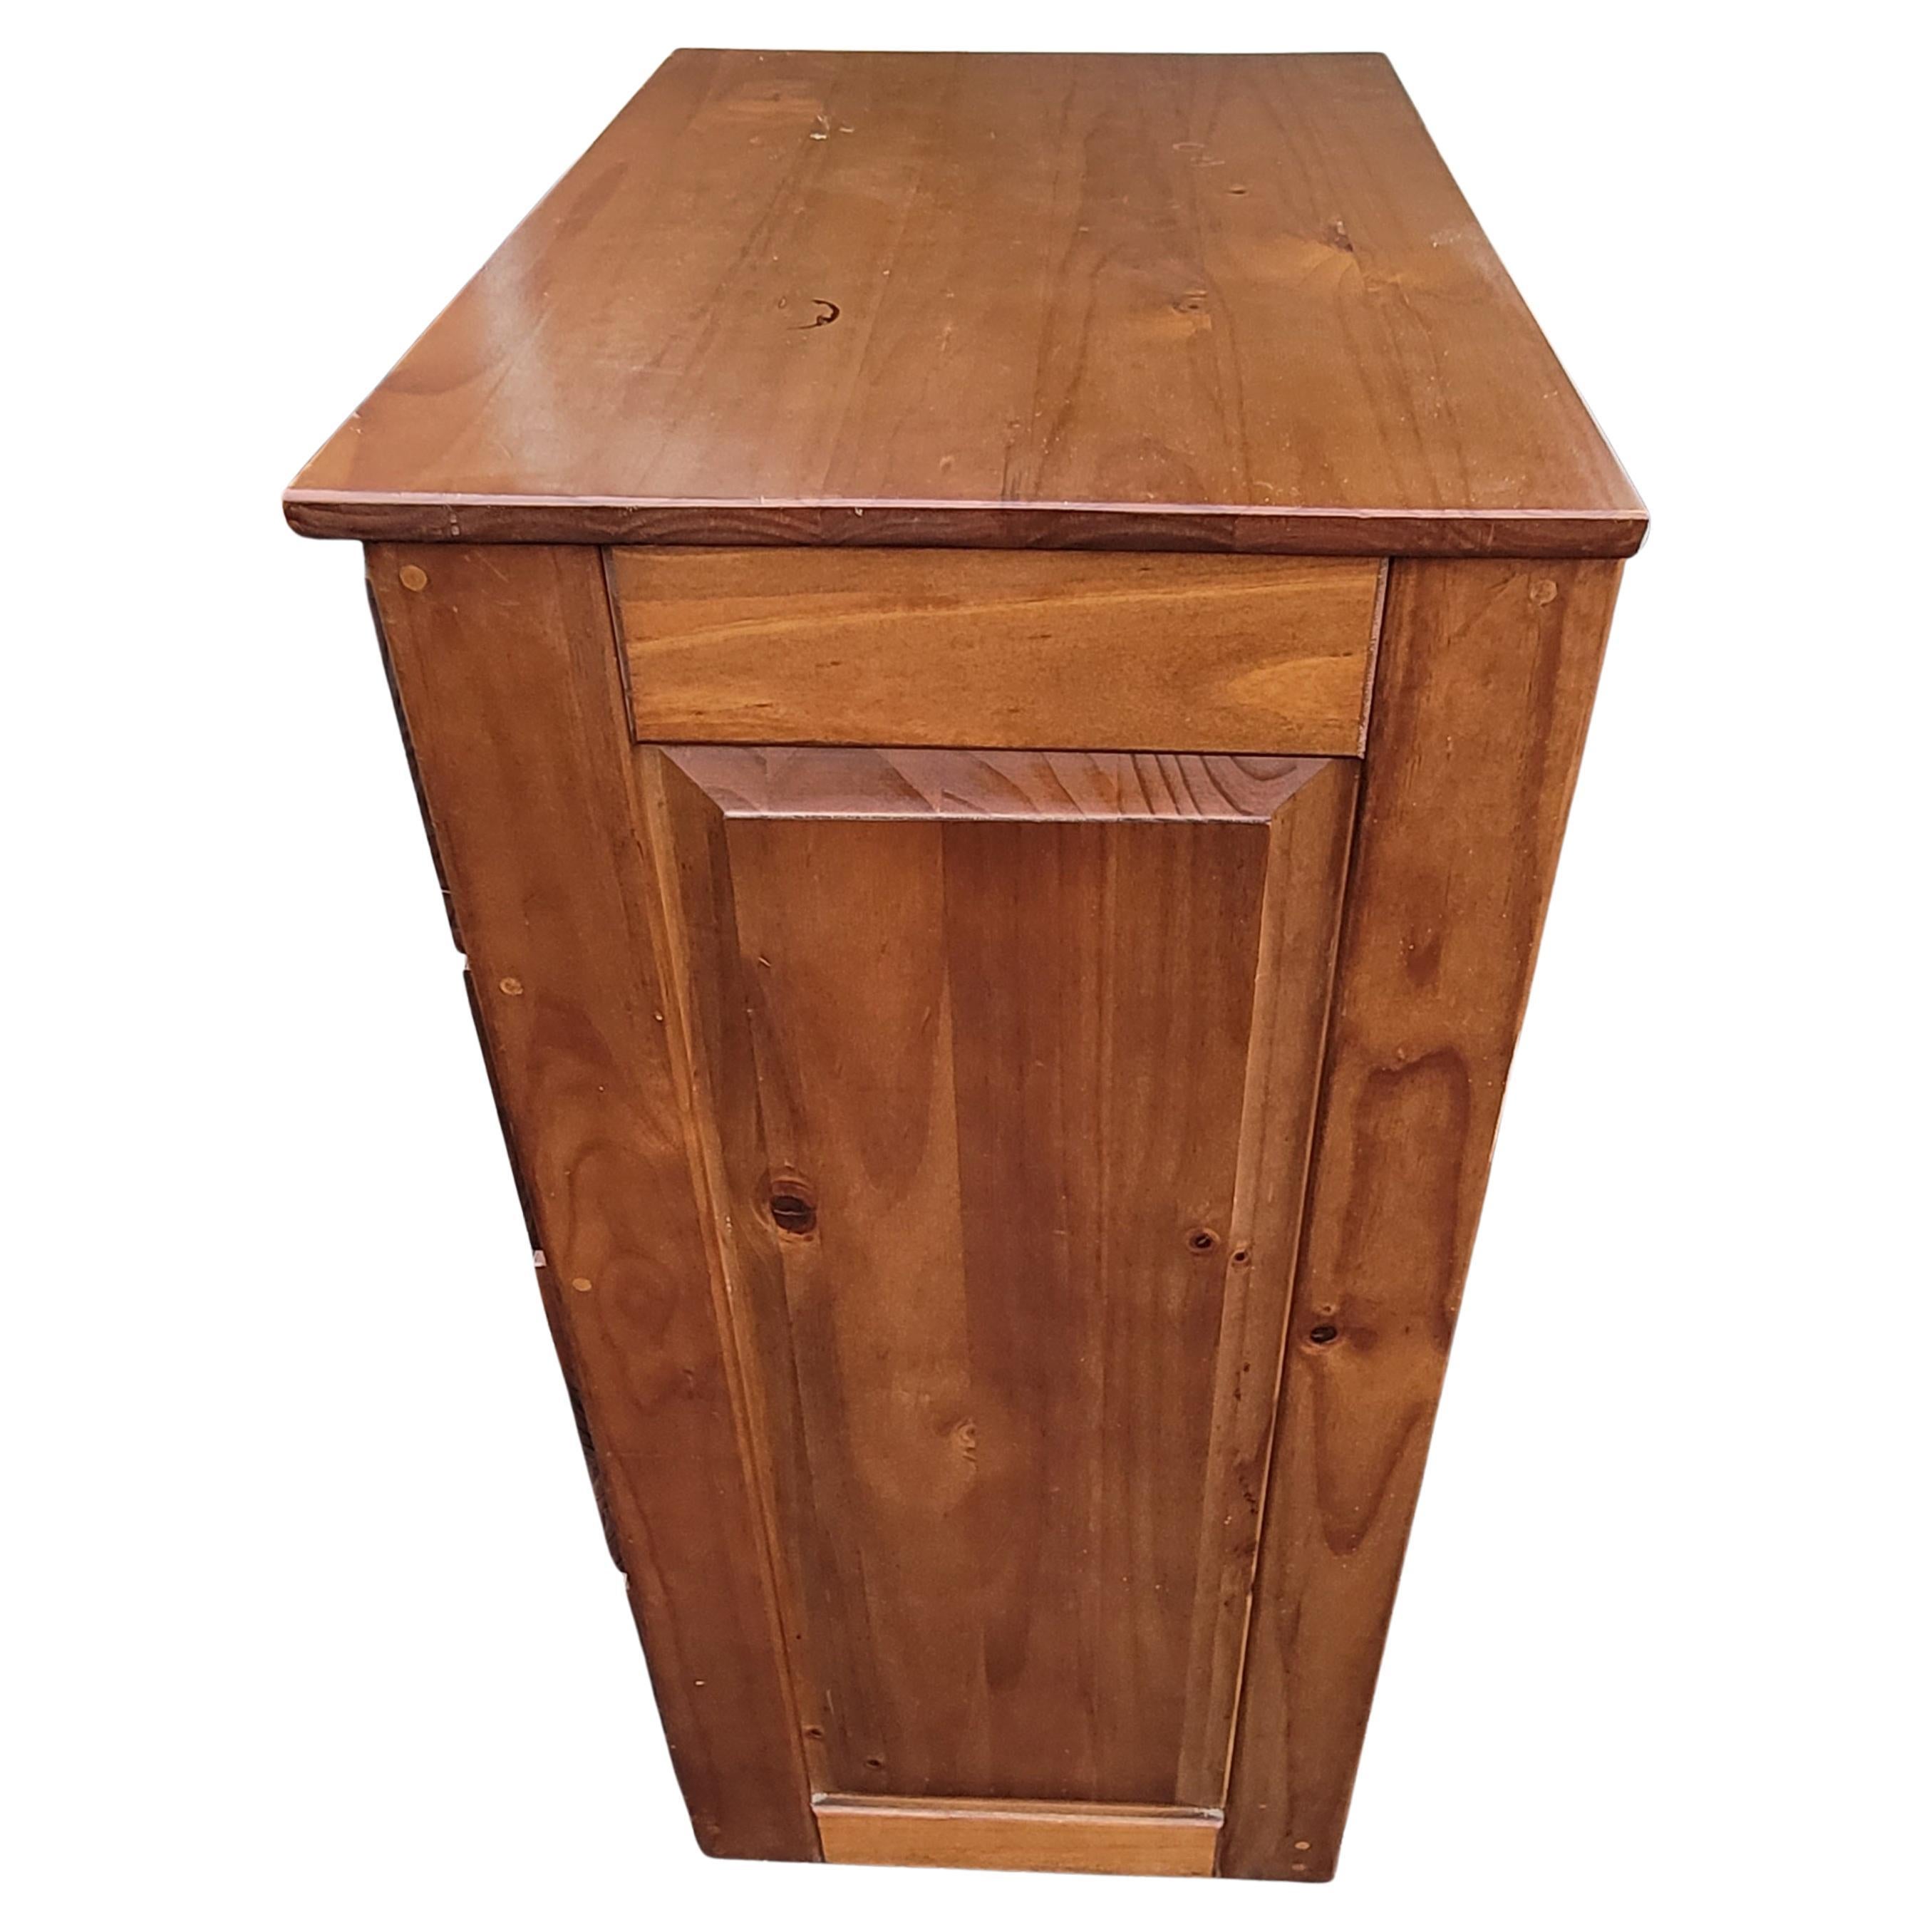 20th Century American Classical Solid Pine with Panelized Sides Chest of Drawers For Sale